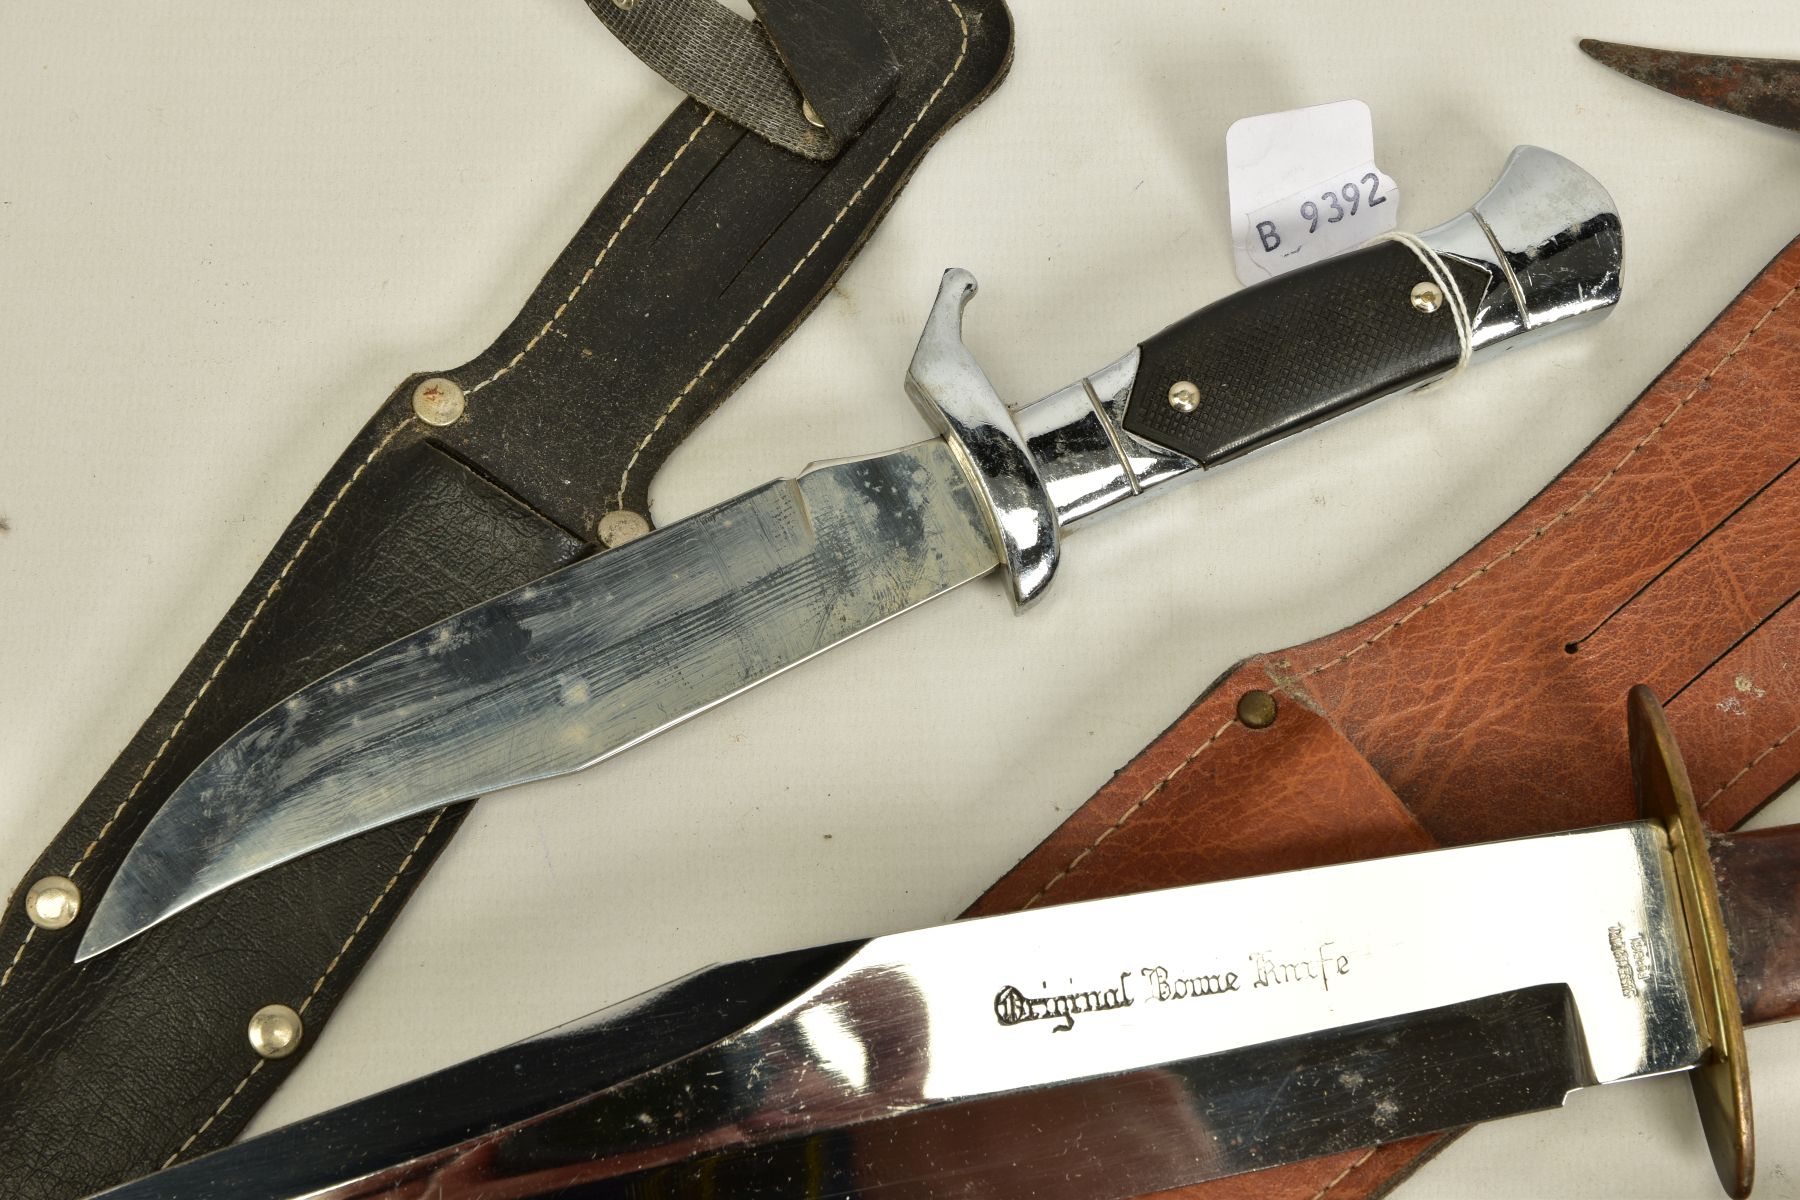 FOUR x MODERN KNIVES/DAGGERS, one is a Bowie knife style, three have scabbards, camping/hunting - Image 4 of 5